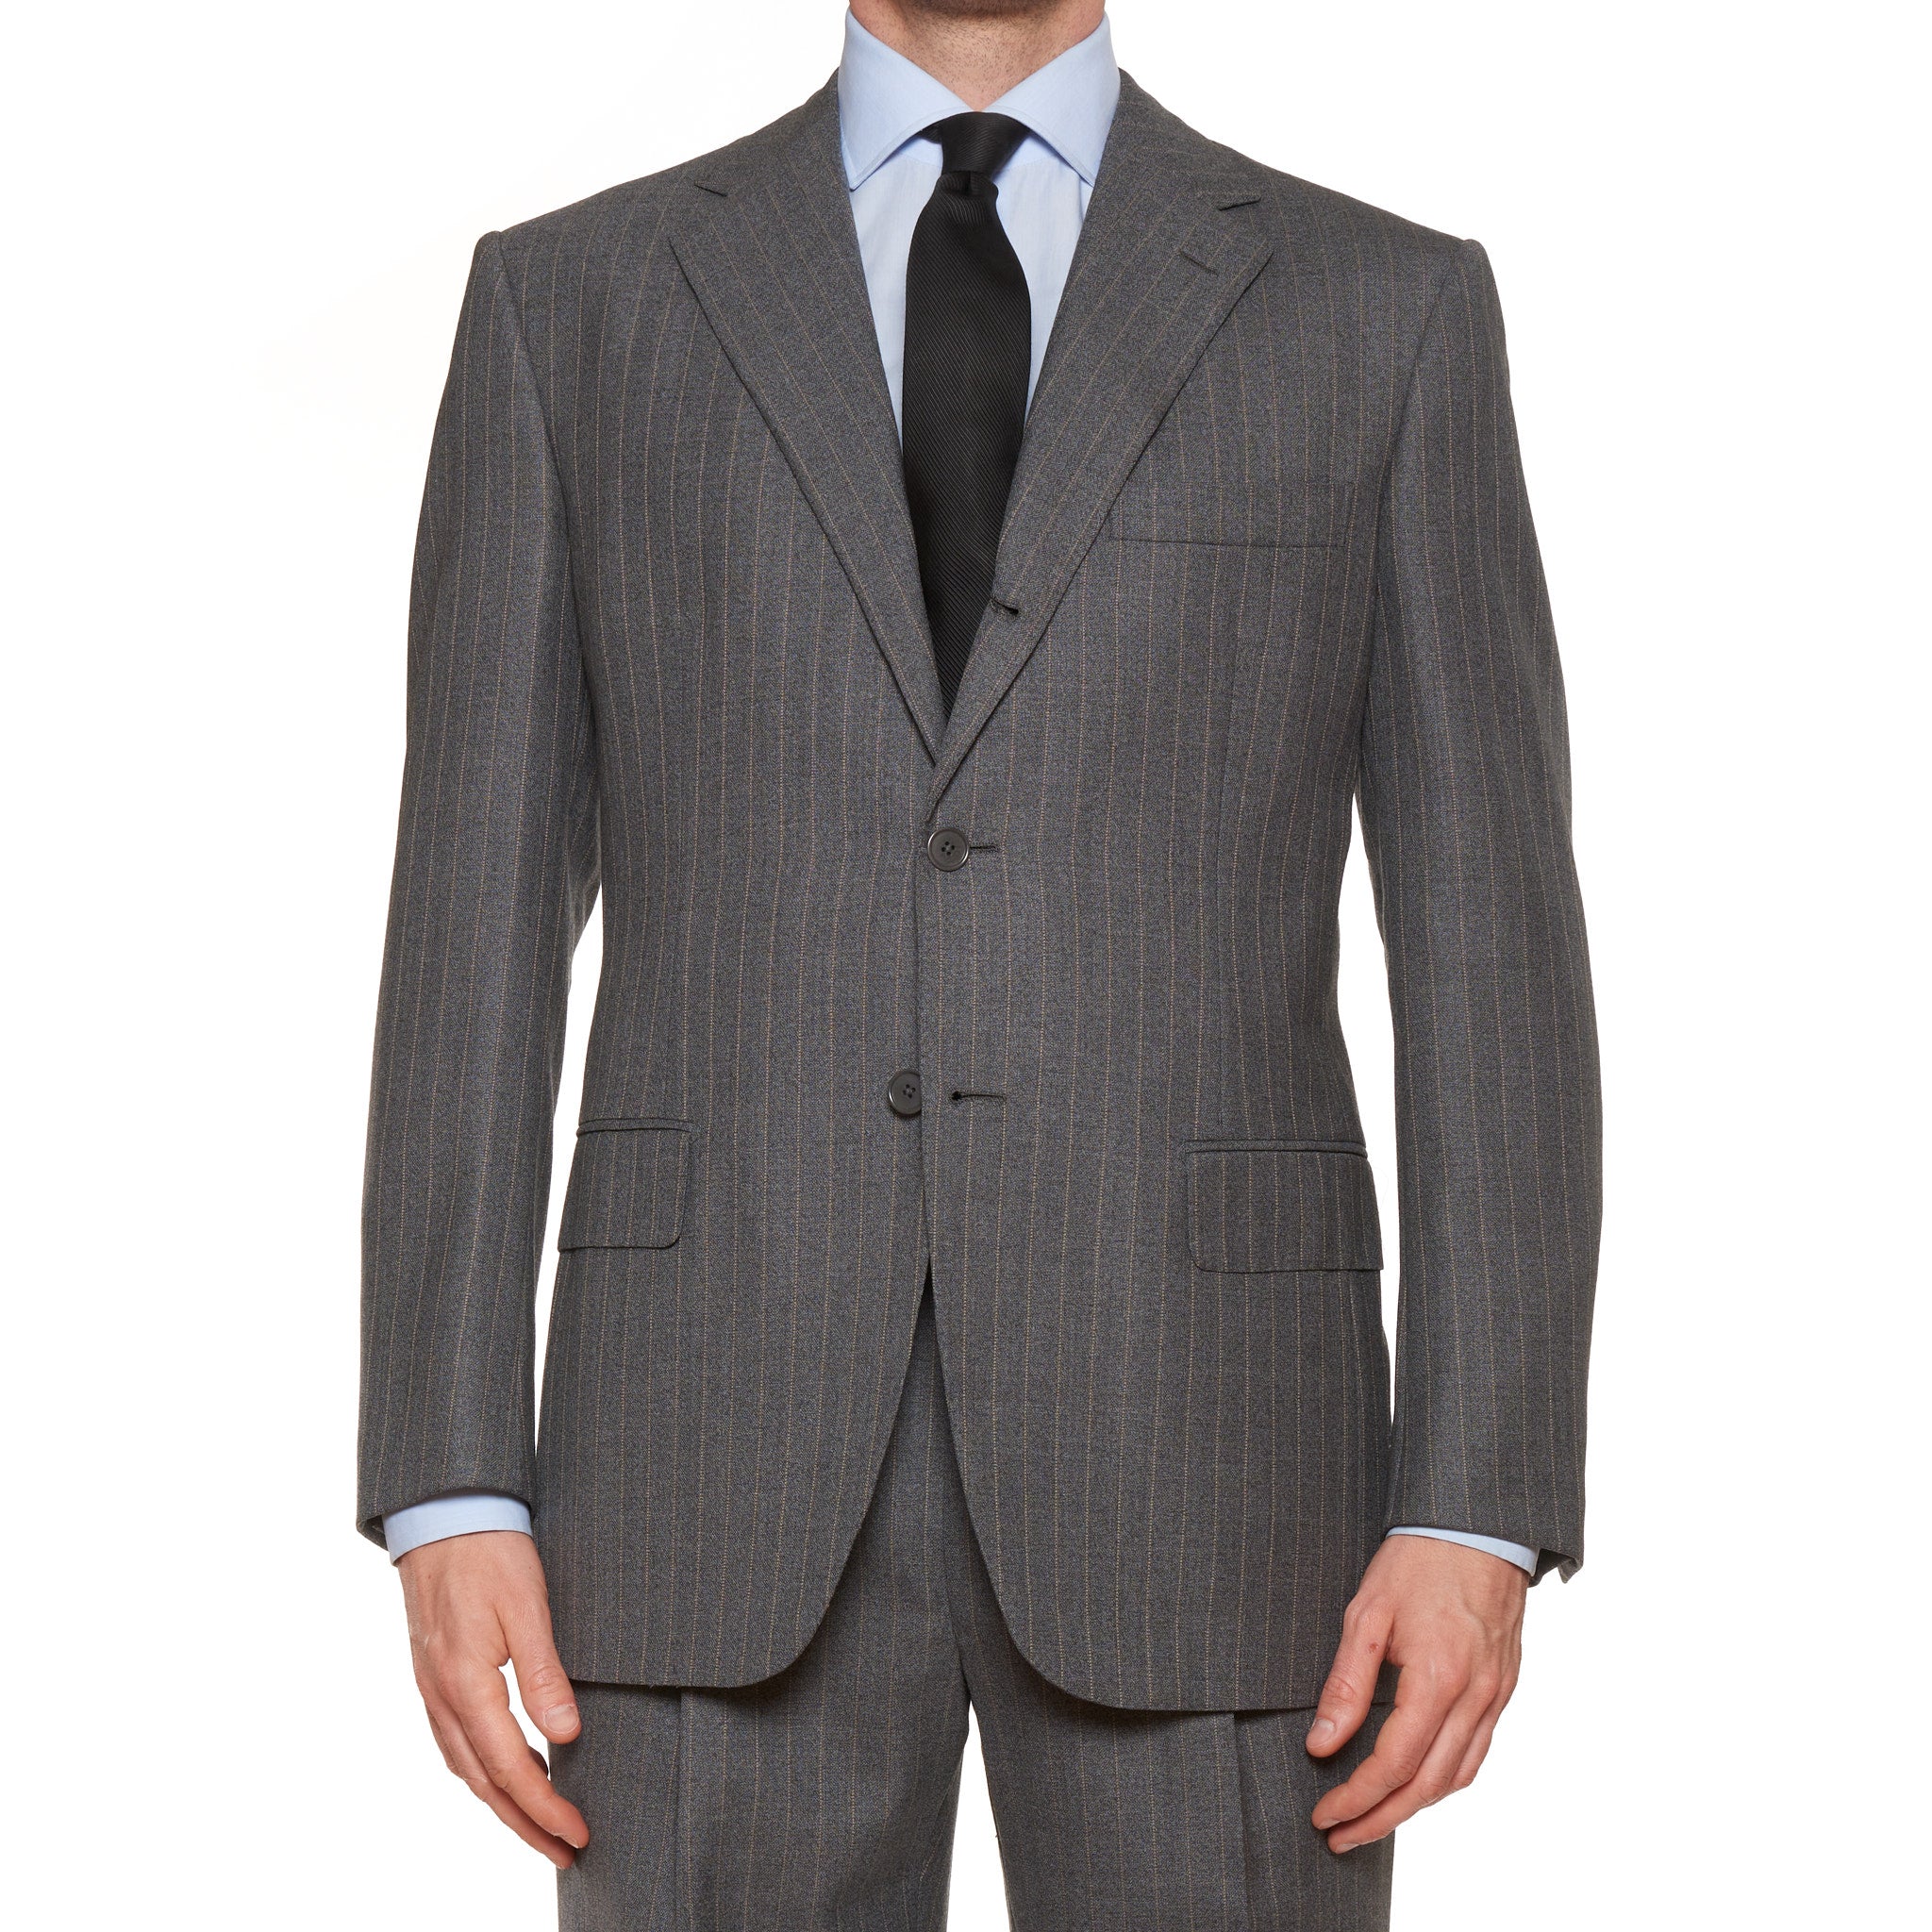 D'AVENZA Roma Handmade Gray Striped Wool Business Suit EU 52 NEW US 42 D'AVENZA